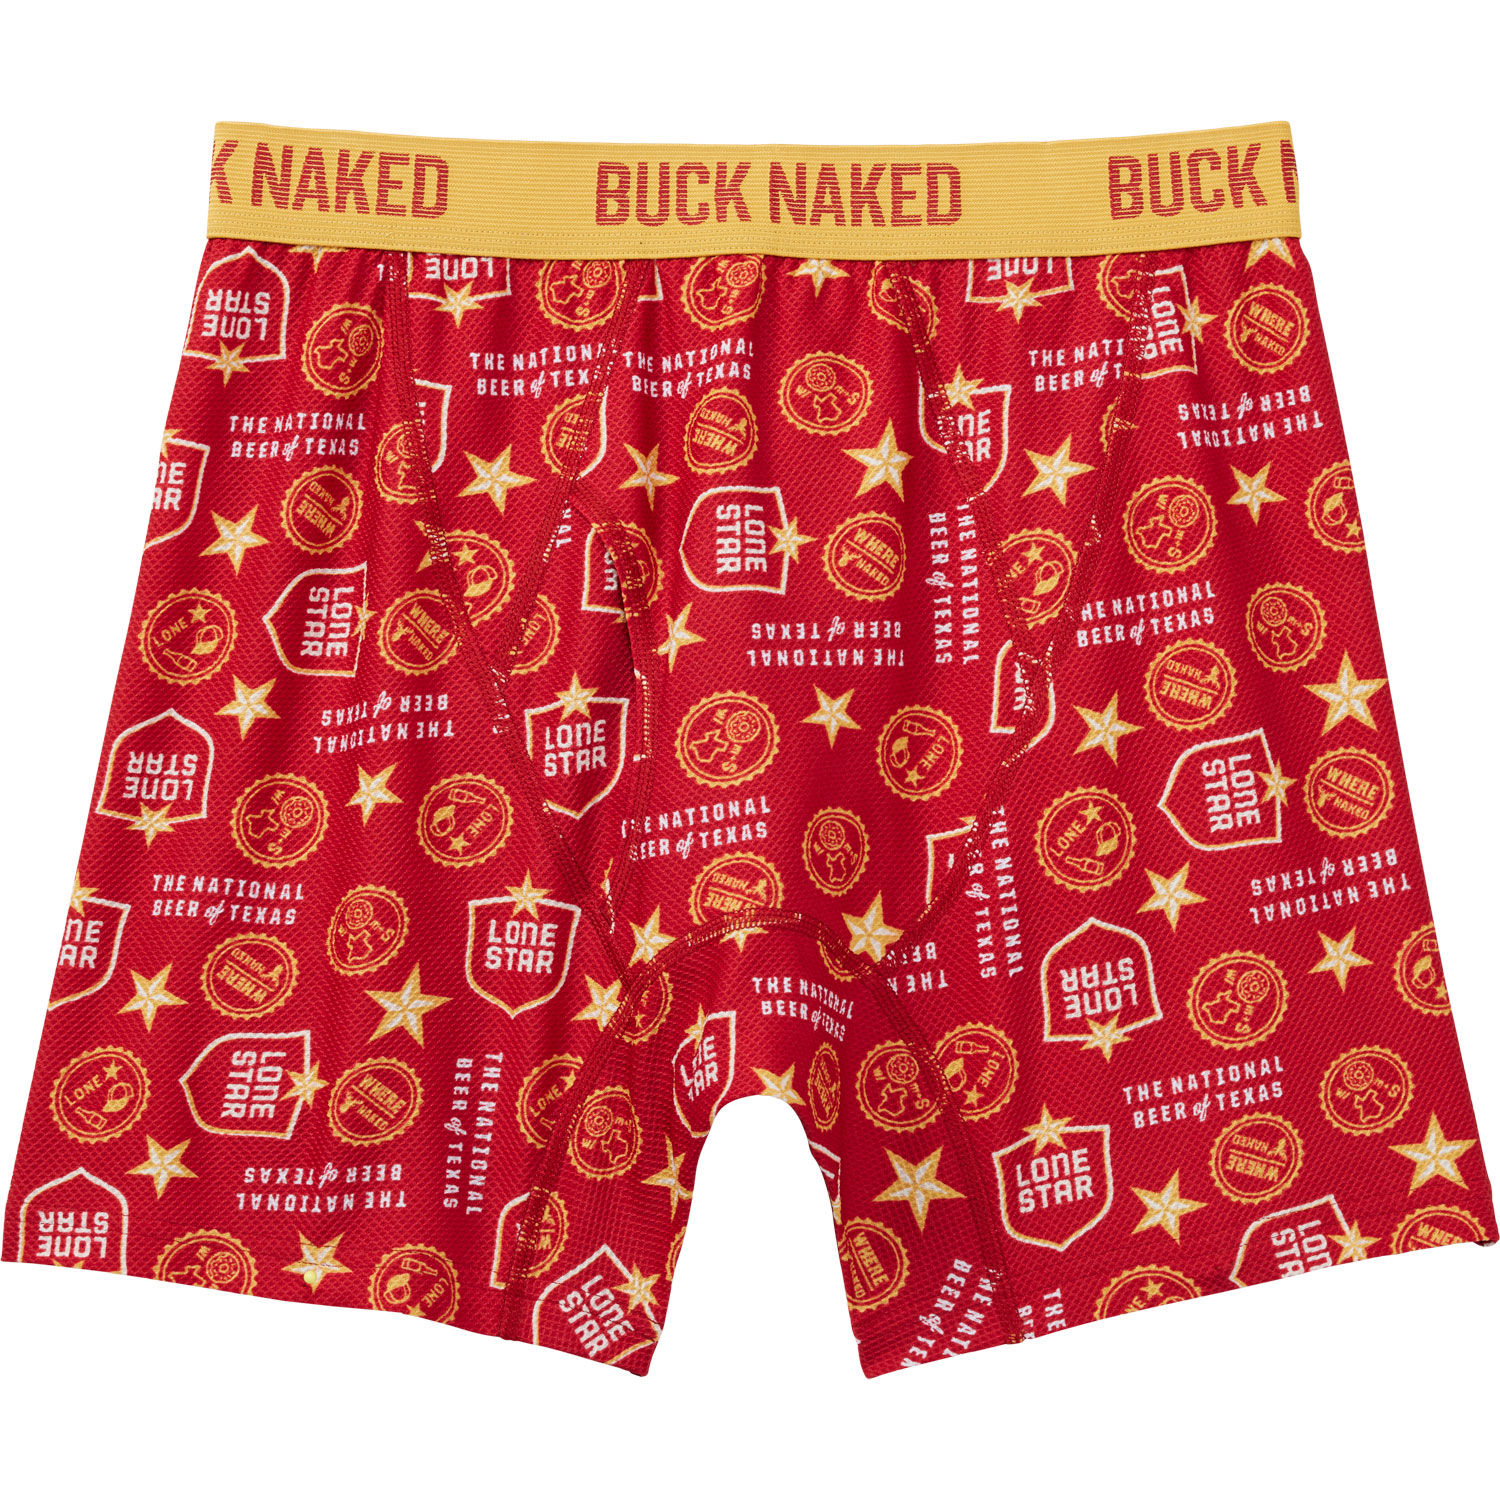 1 Pair Duluth Trading Buck Naked Boxer Brief in St Knickers 76715